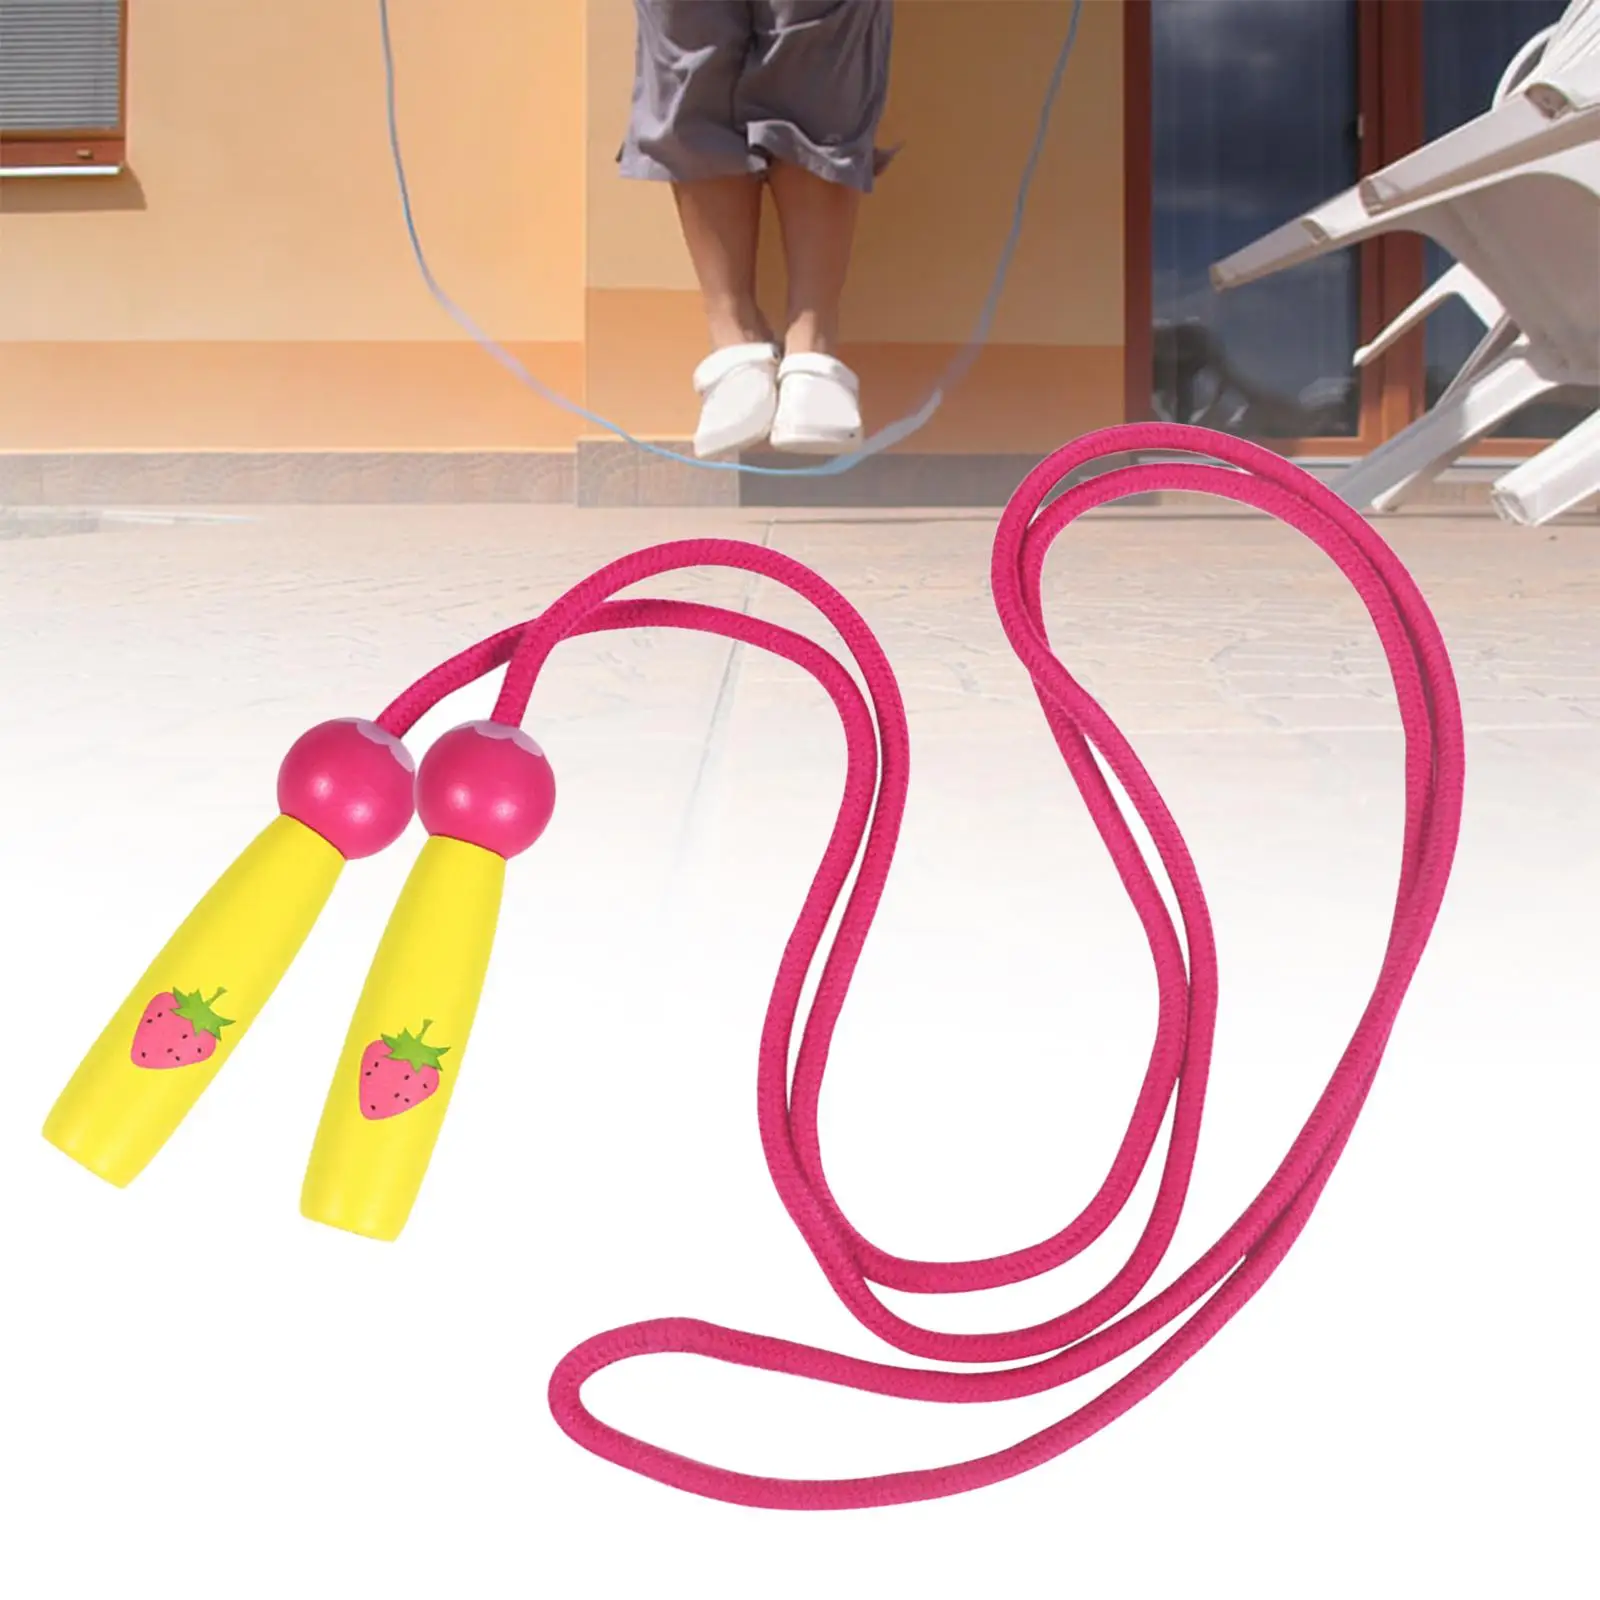 Cotton Jump Rope Adjustable Birthday Gift Skipping Rope for Exercise Activities Boys Girls